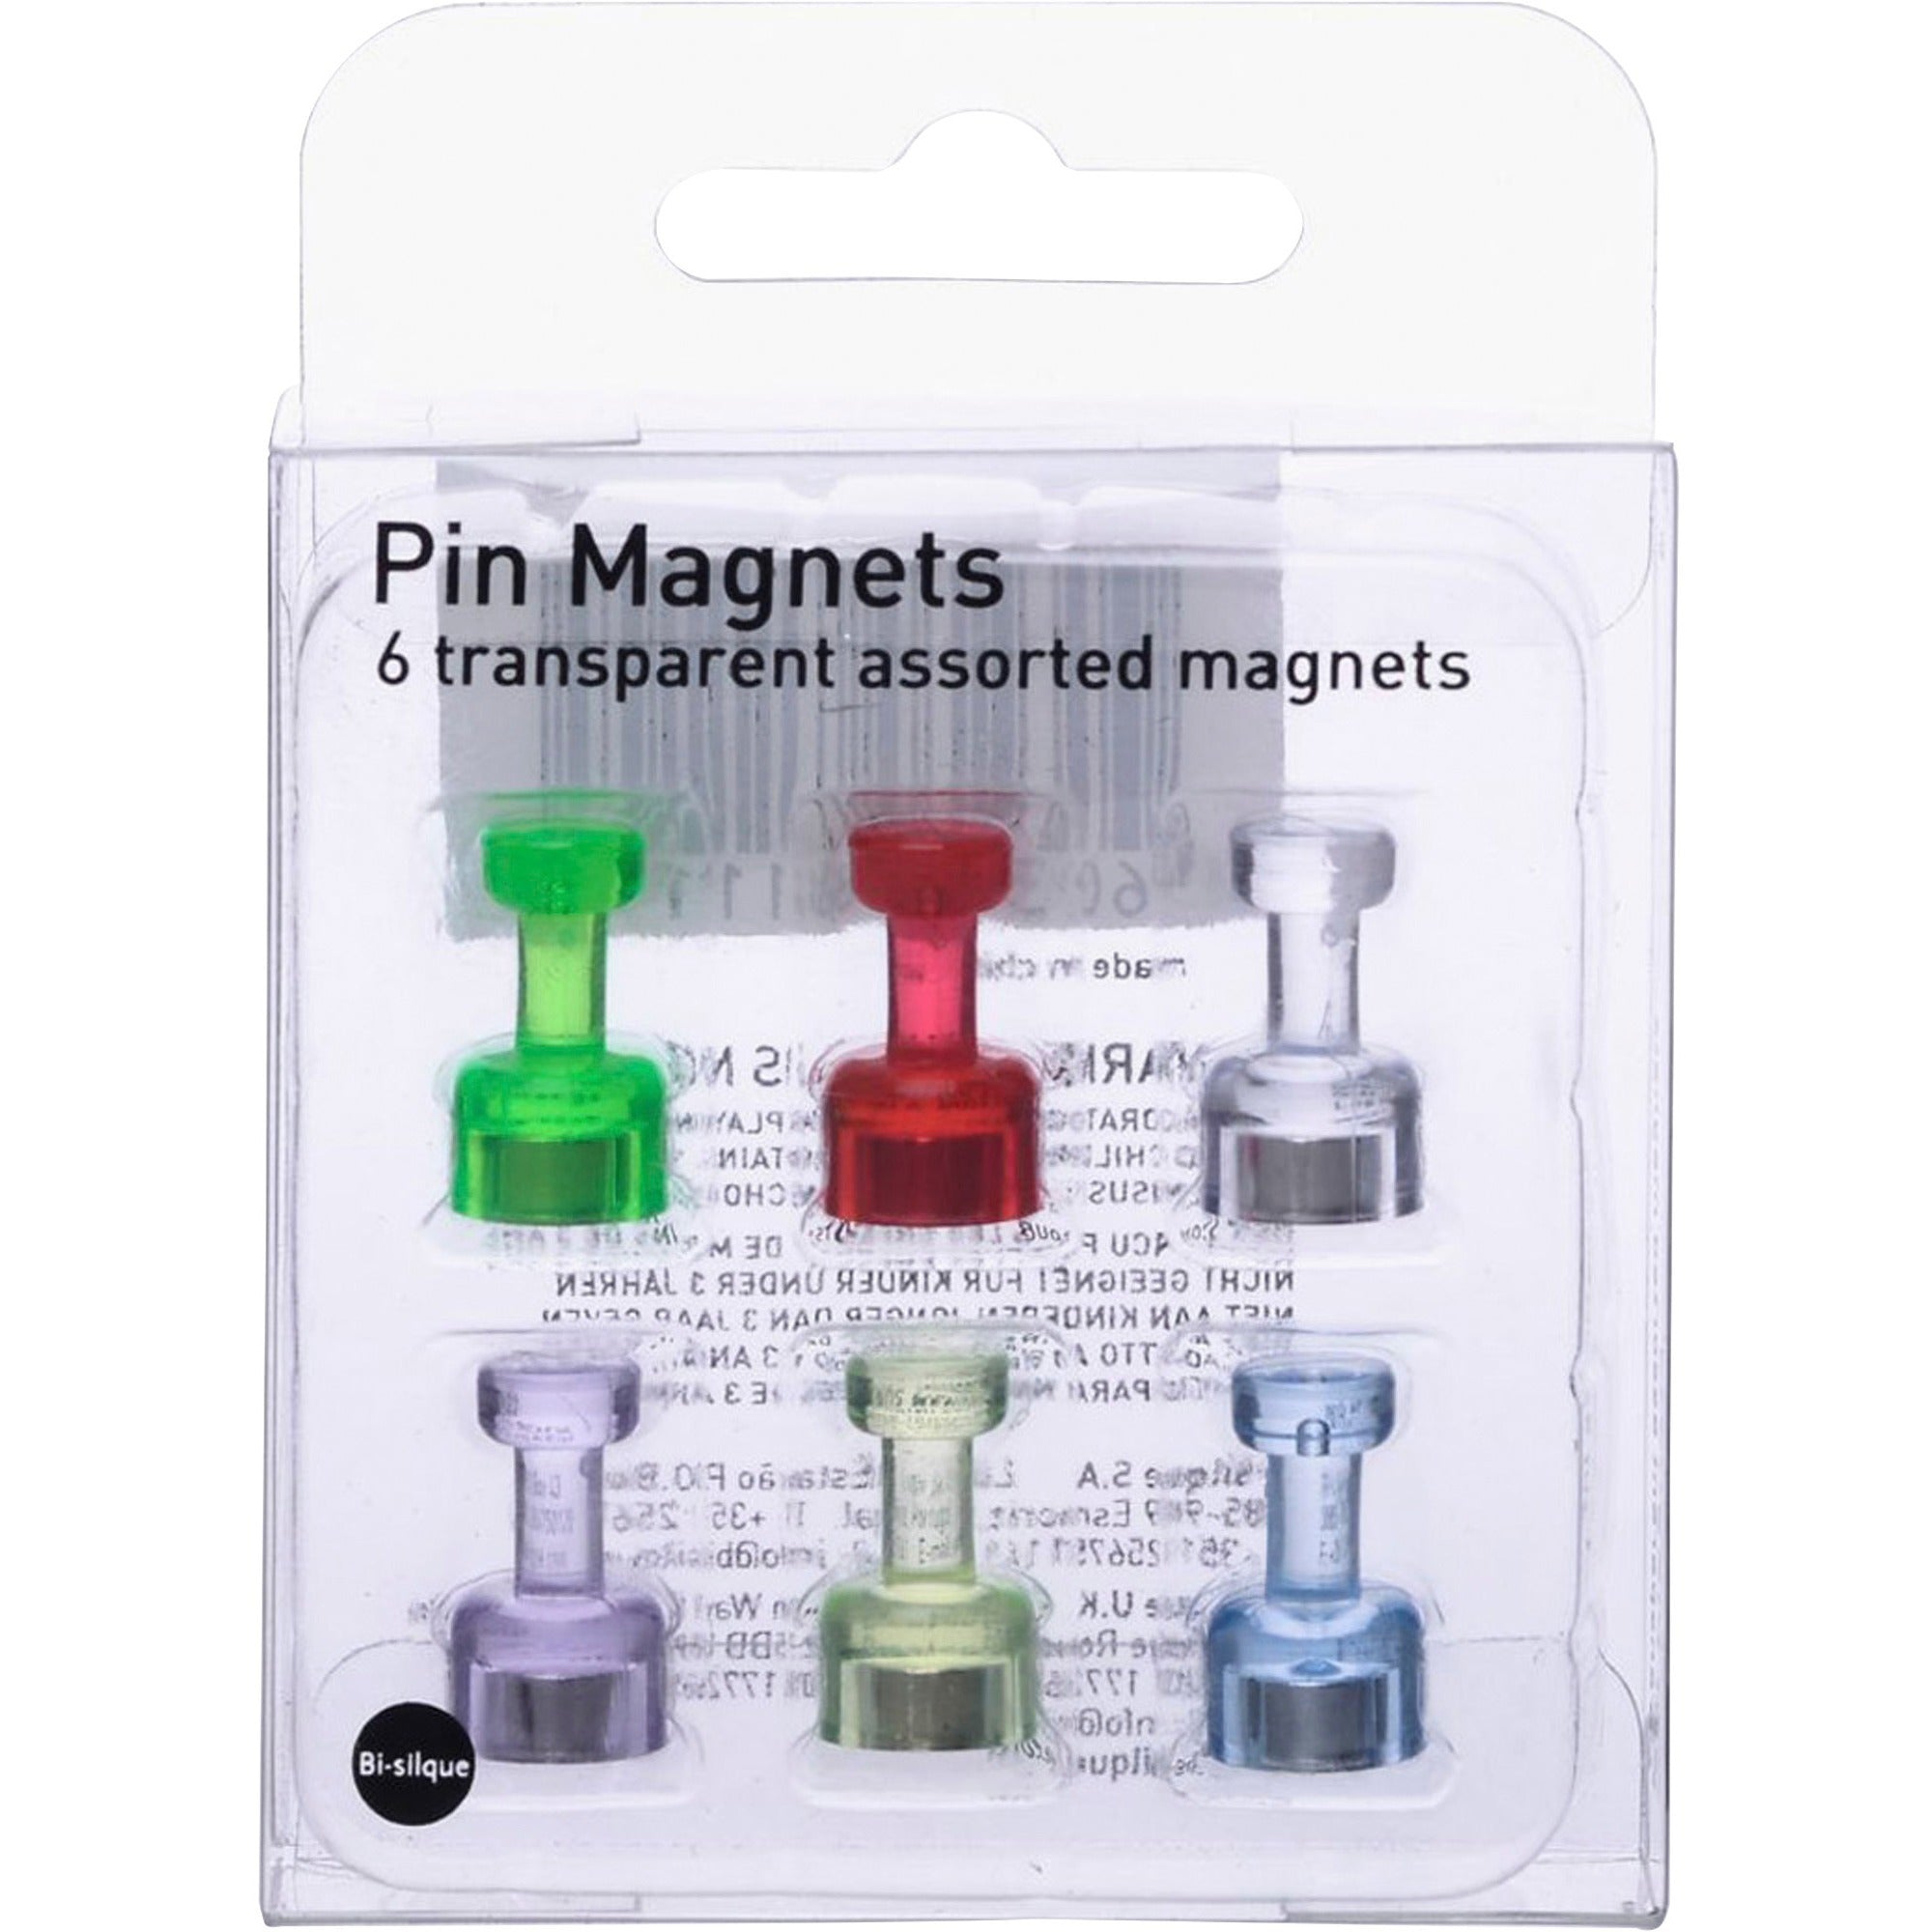 mastervision-planning-board-magnetic-push-pins-03-diameter-1-each-gray-blue-red_bvcim356601 - 1